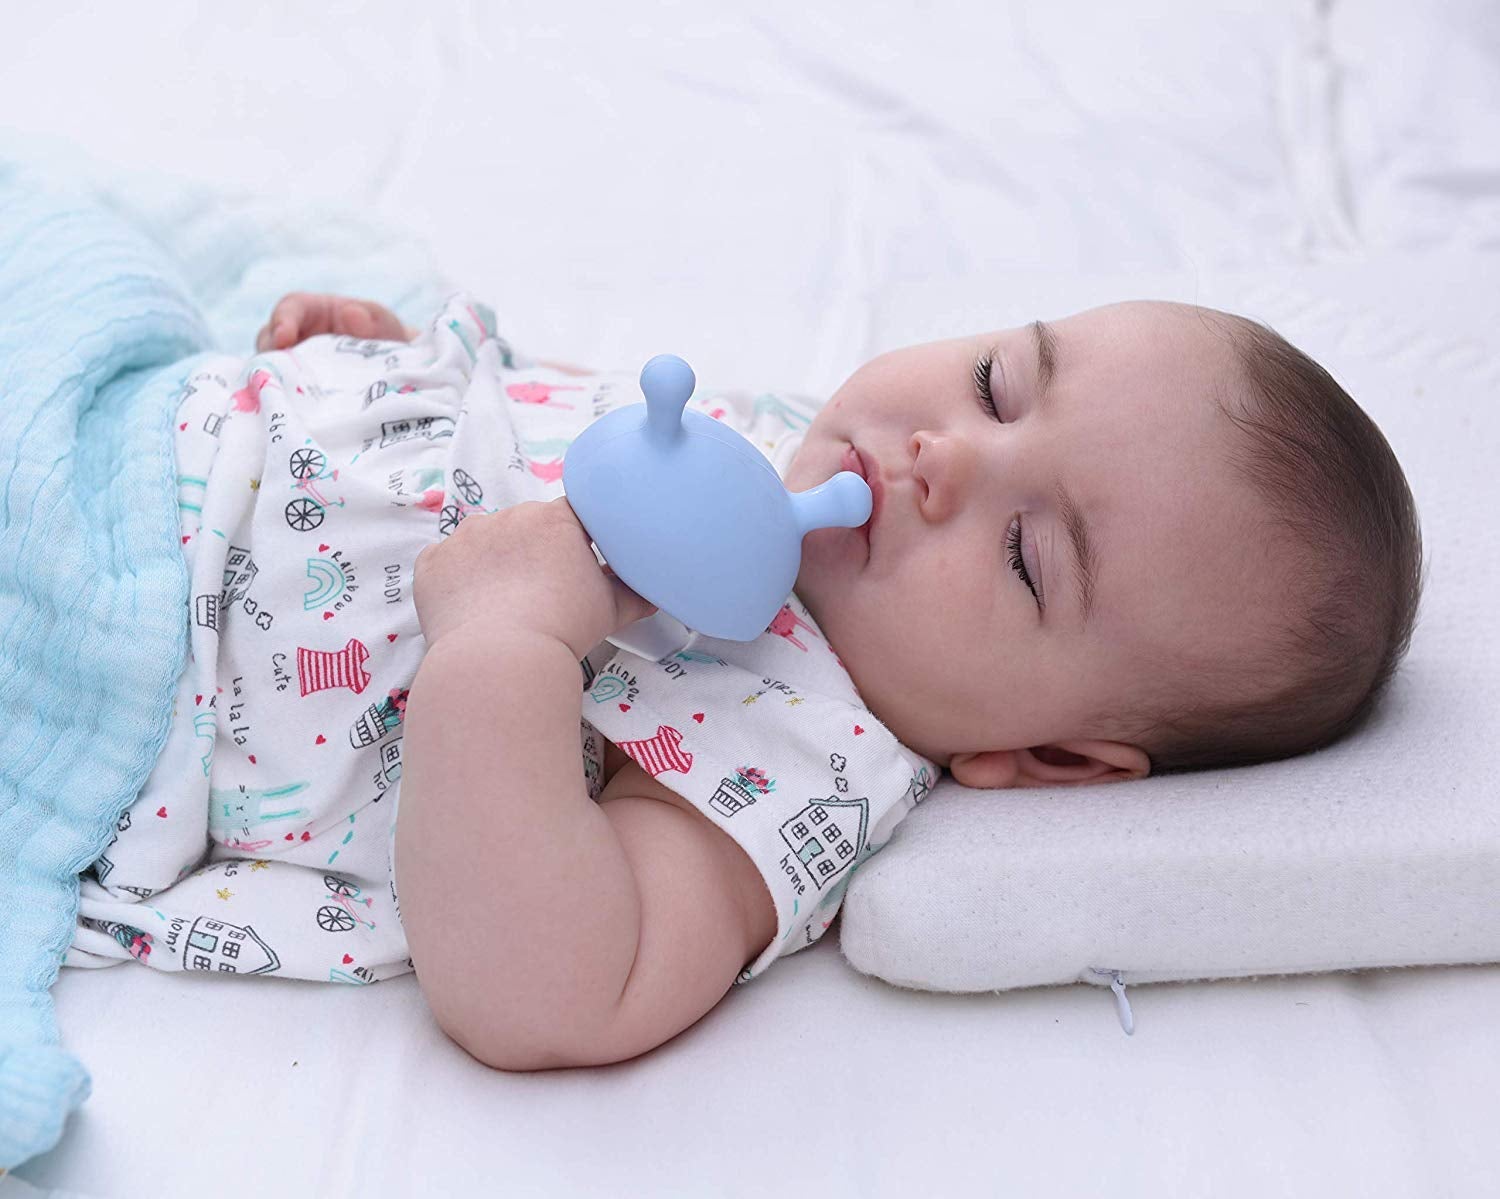 Baby holding the blue mushroom-shaped pacifier